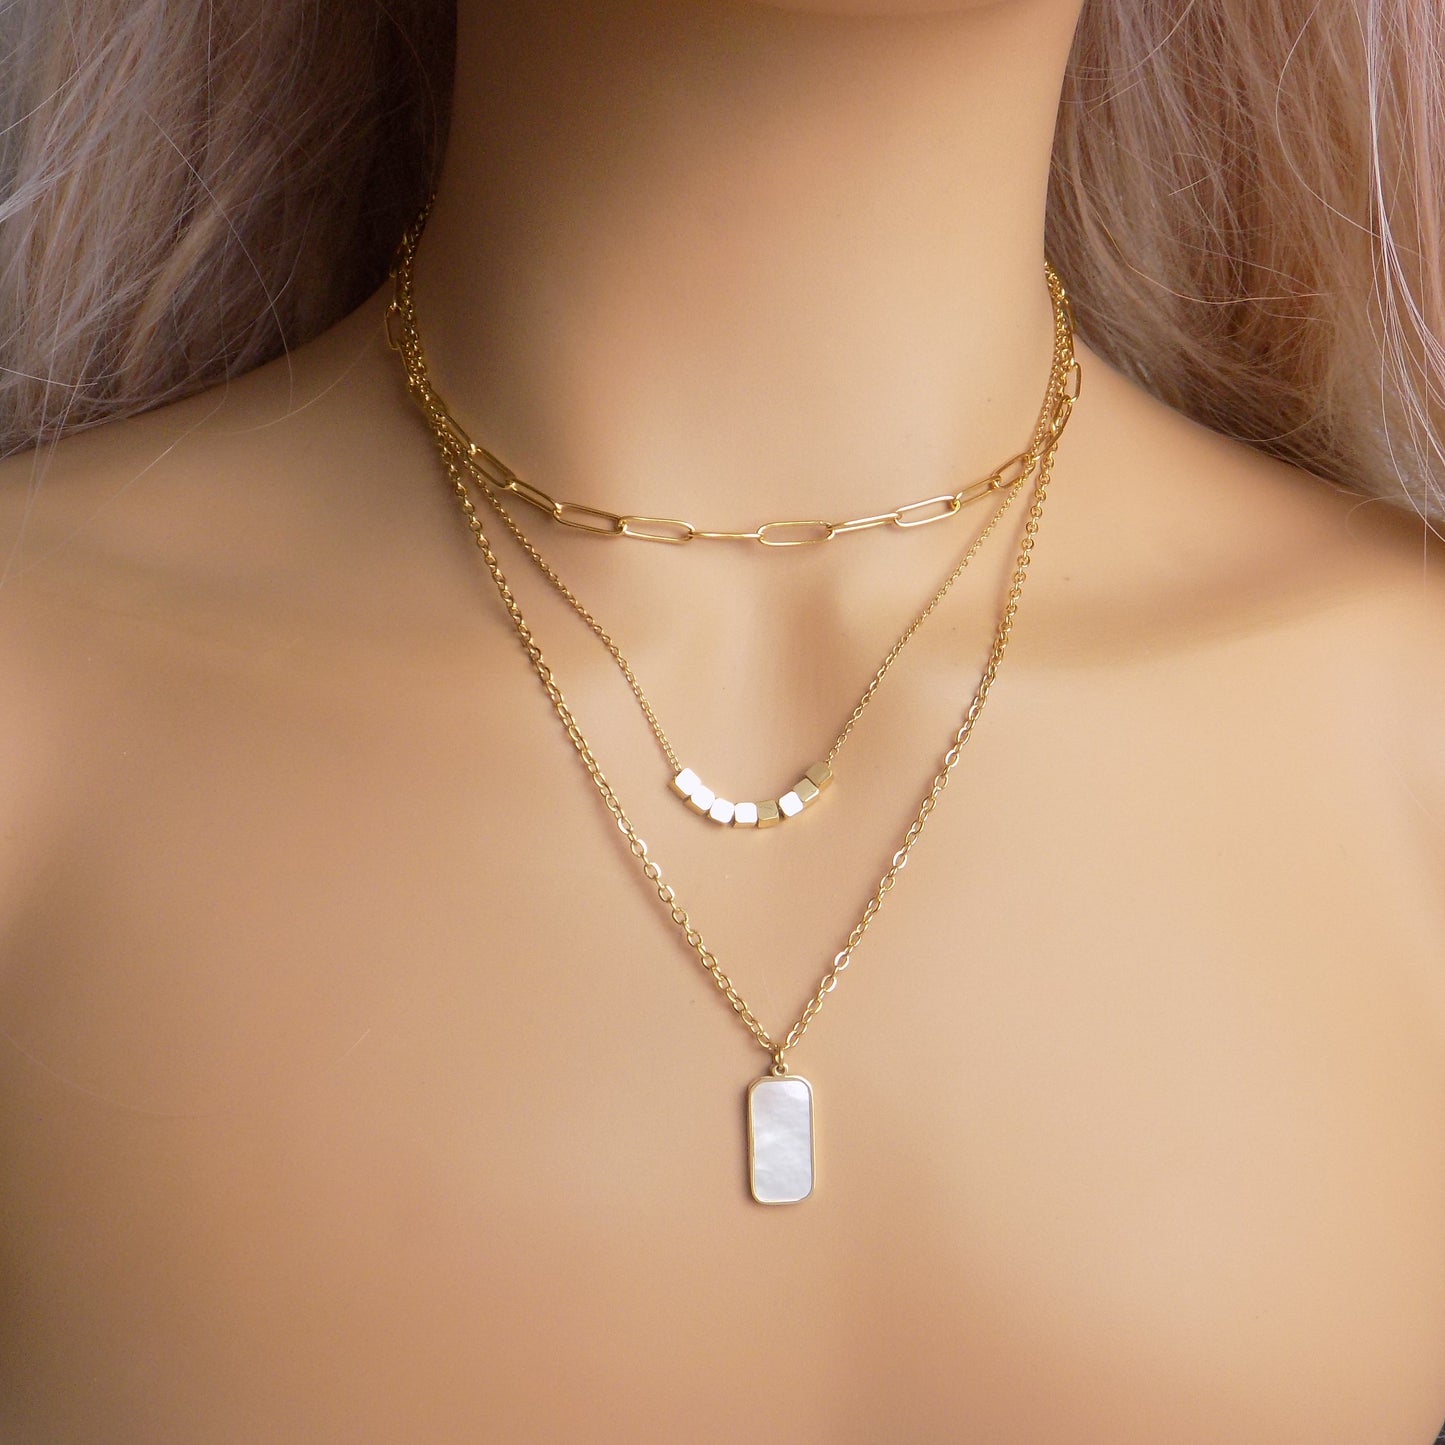 Trendy Gold Layered Necklace - Paperclip Chain - Mother of Pearl Charm - 18K Gold Stainless Steel